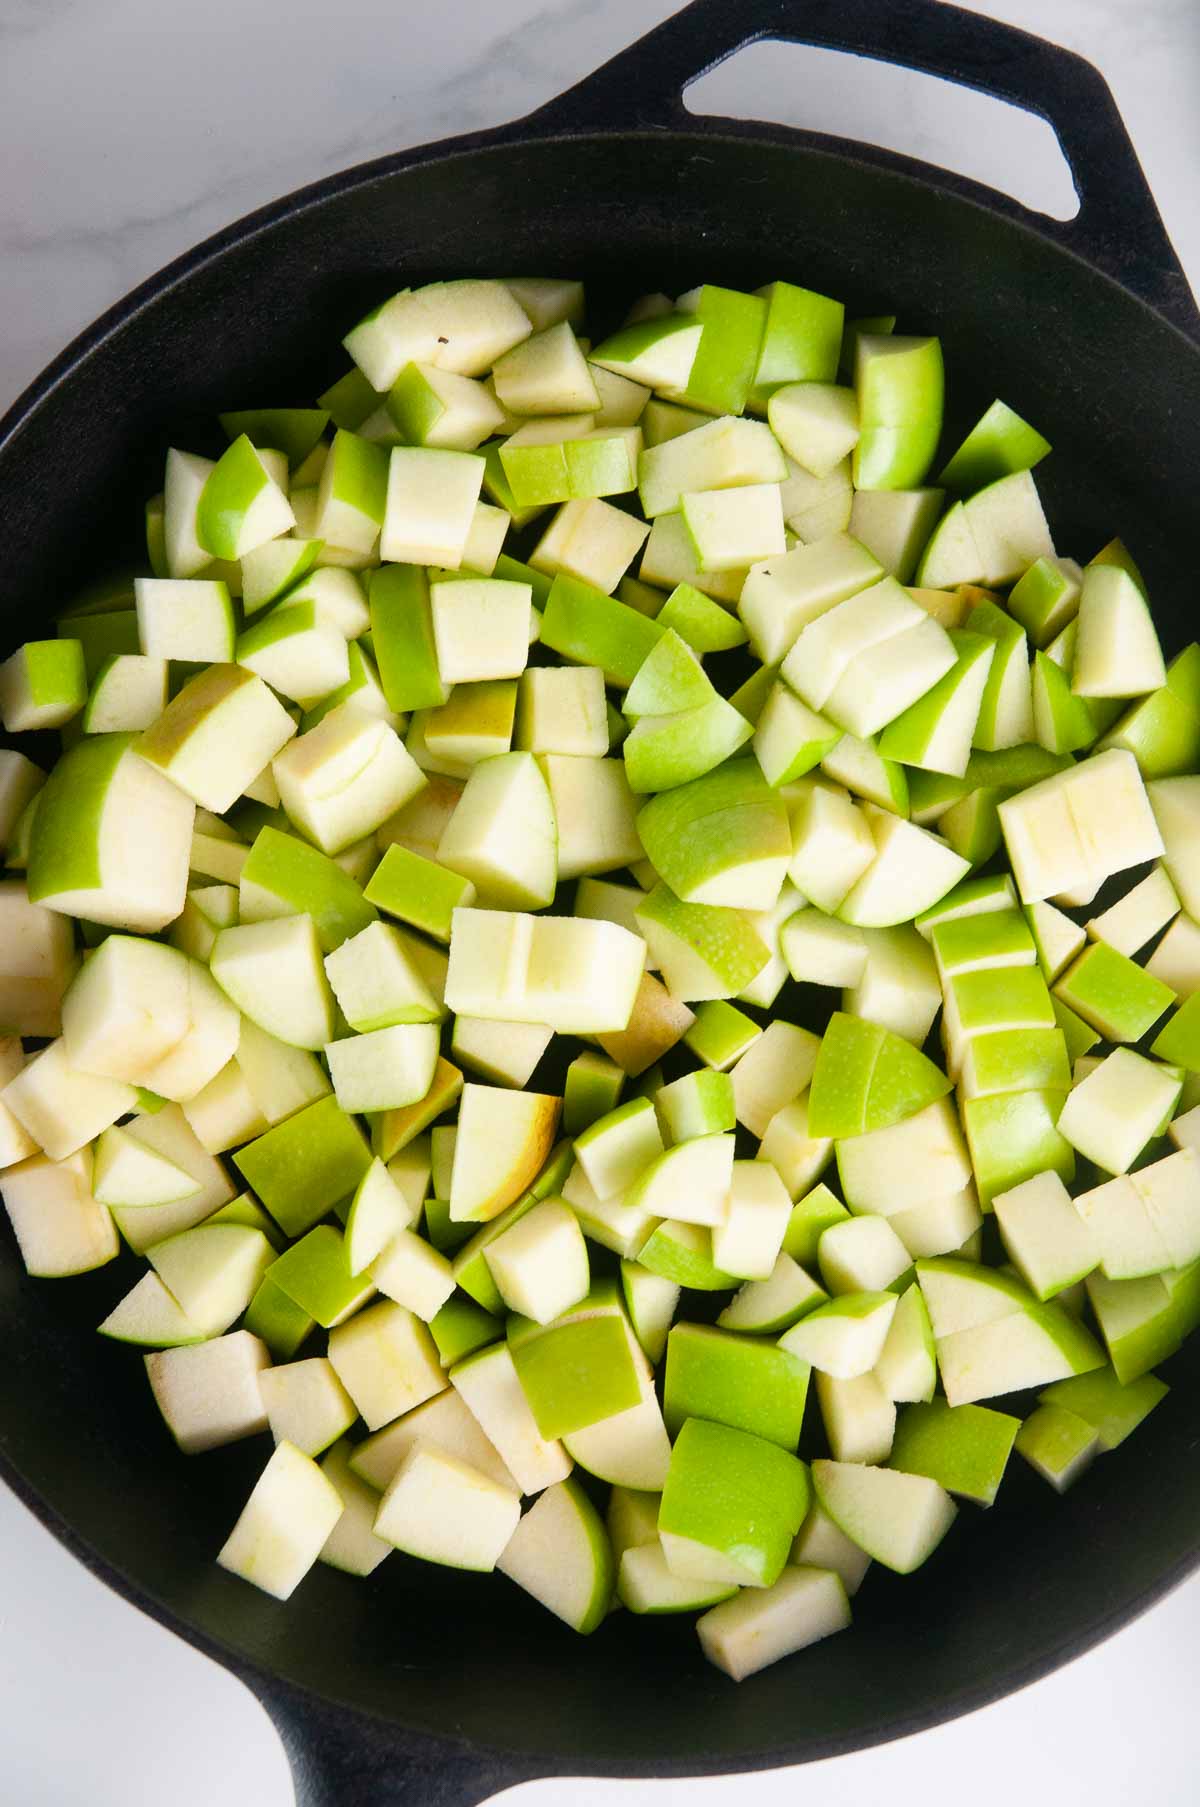 Cook the diced apples in a pan.